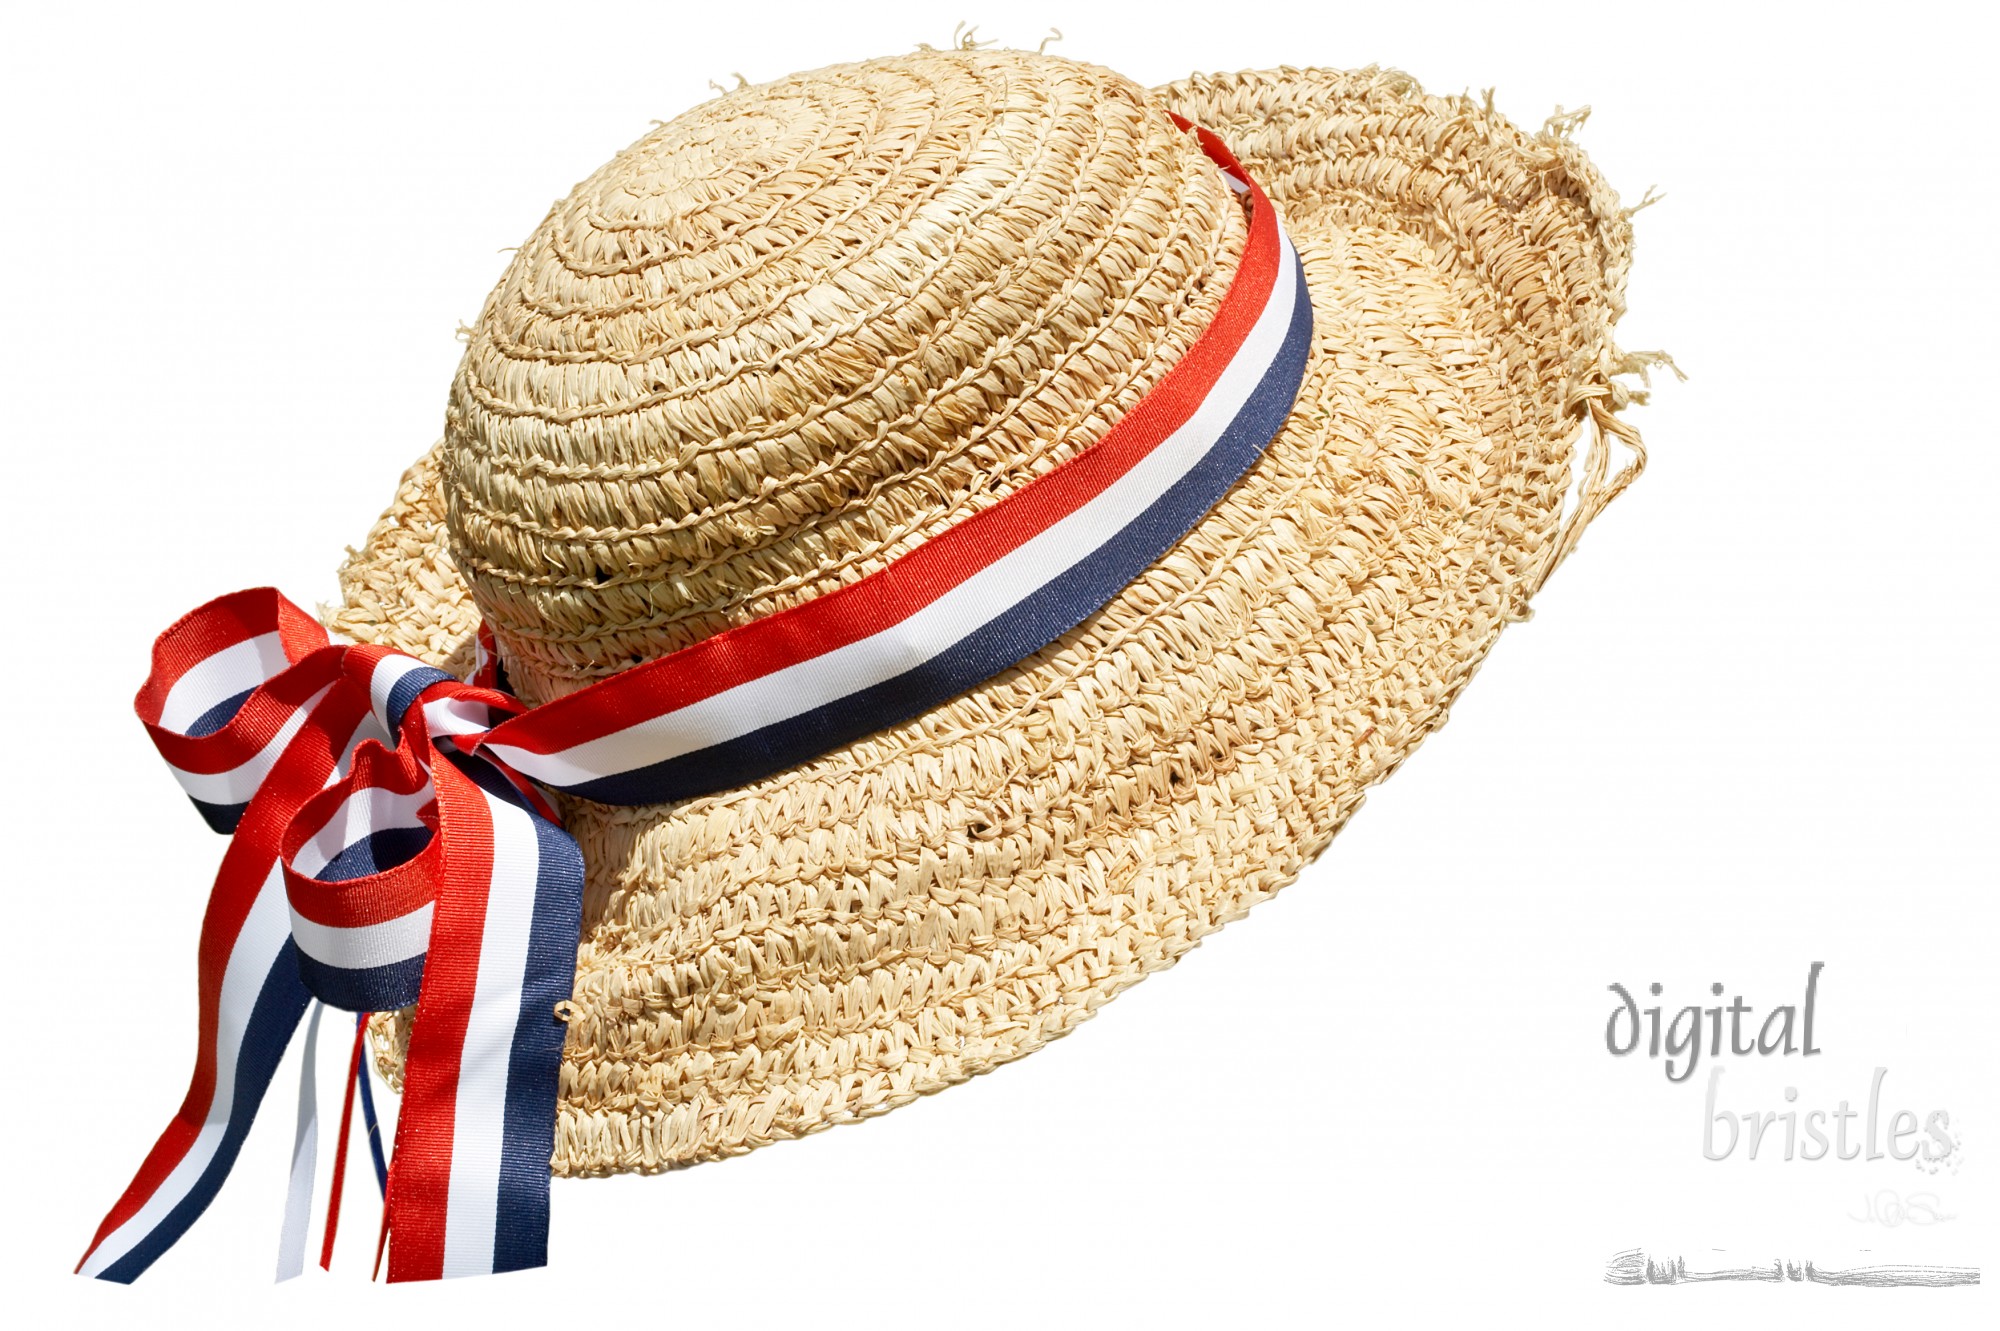 Isolated straw hat with red, white & blue ribbons
